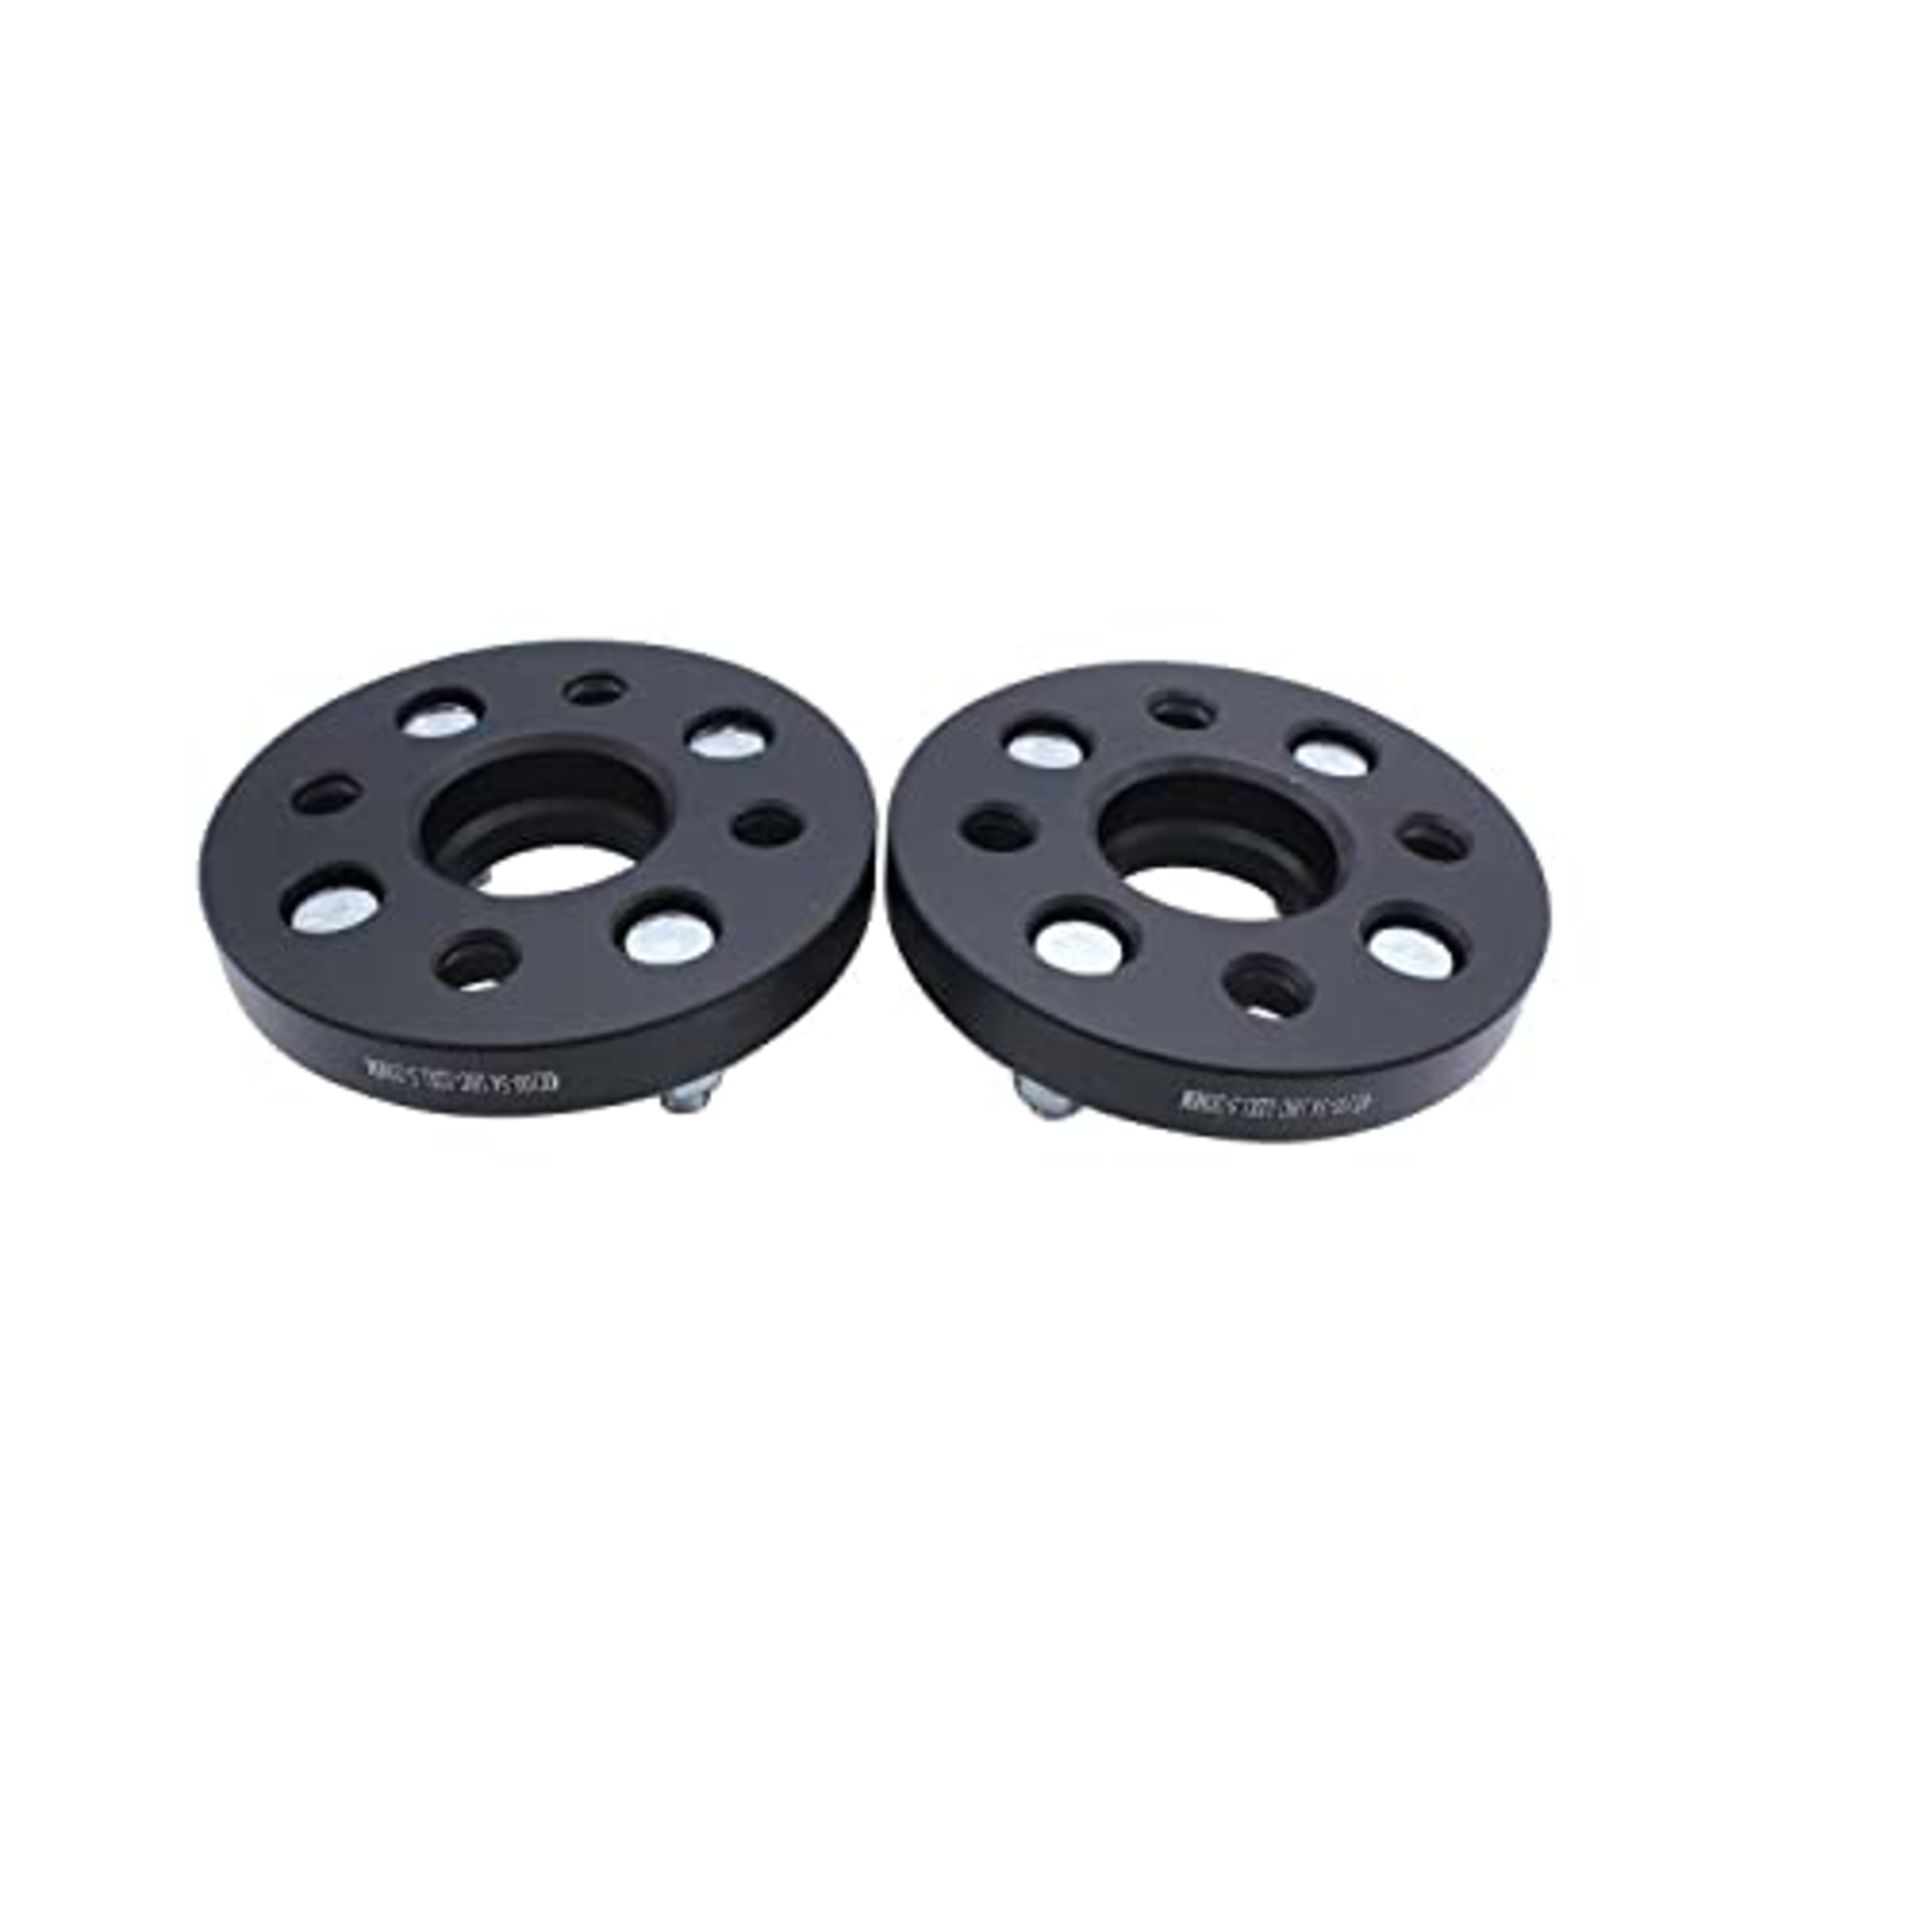 2pcs 20mm Spacers 4x100 PCD Hubcentric Forged Wheels Spacer Kit mit 8x Lug Bolts M12x1